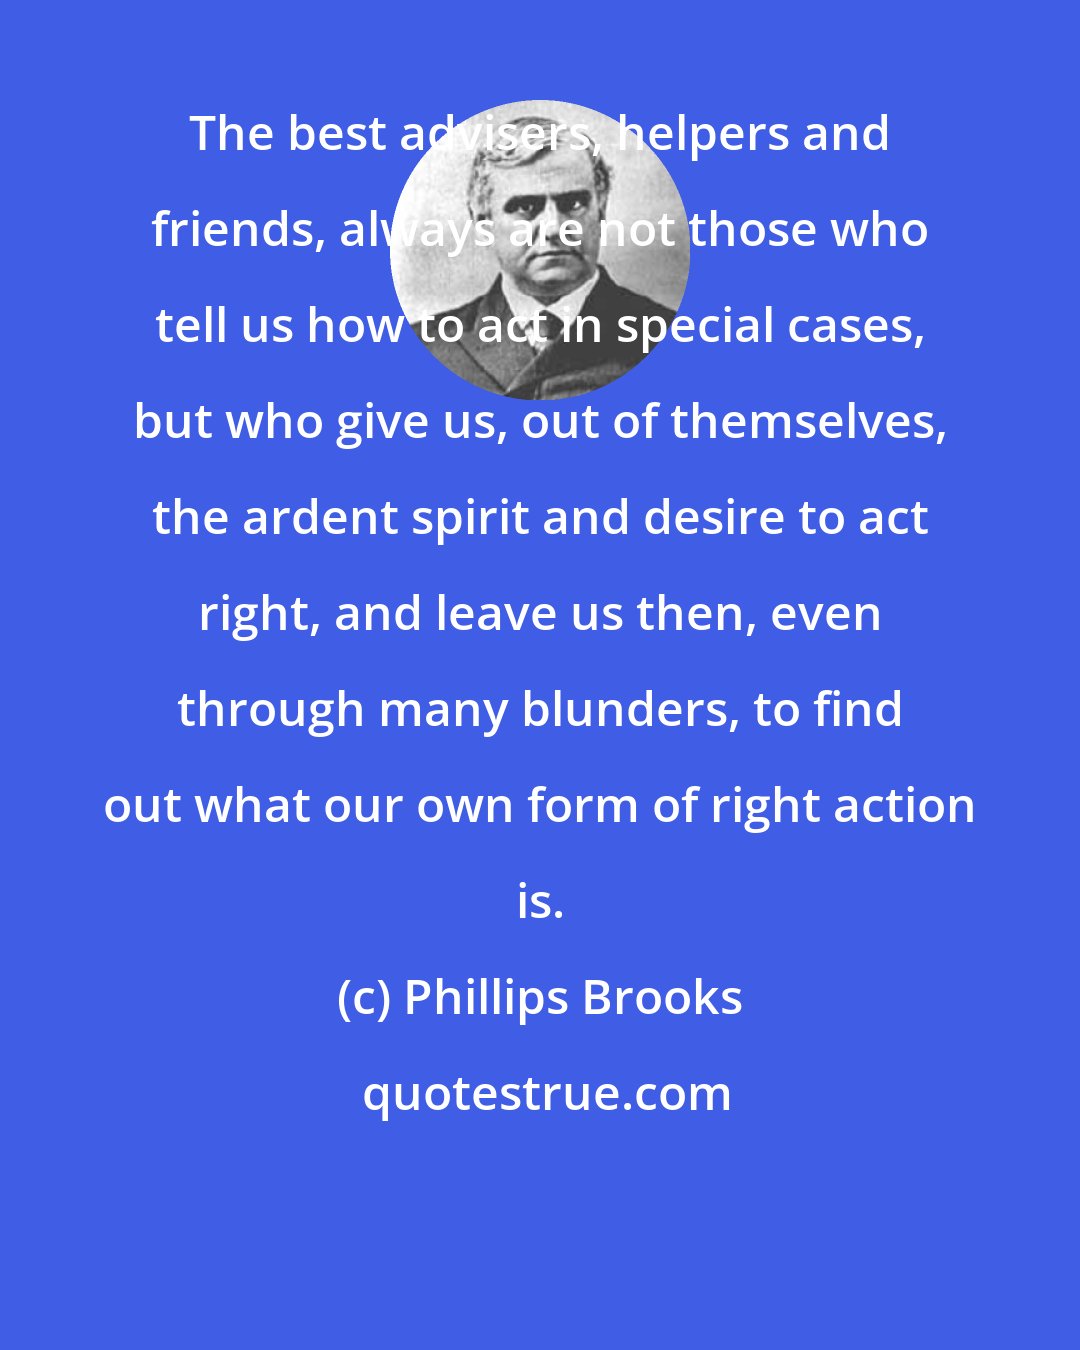 Phillips Brooks: The best advisers, helpers and friends, always are not those who tell us how to act in special cases, but who give us, out of themselves, the ardent spirit and desire to act right, and leave us then, even through many blunders, to find out what our own form of right action is.